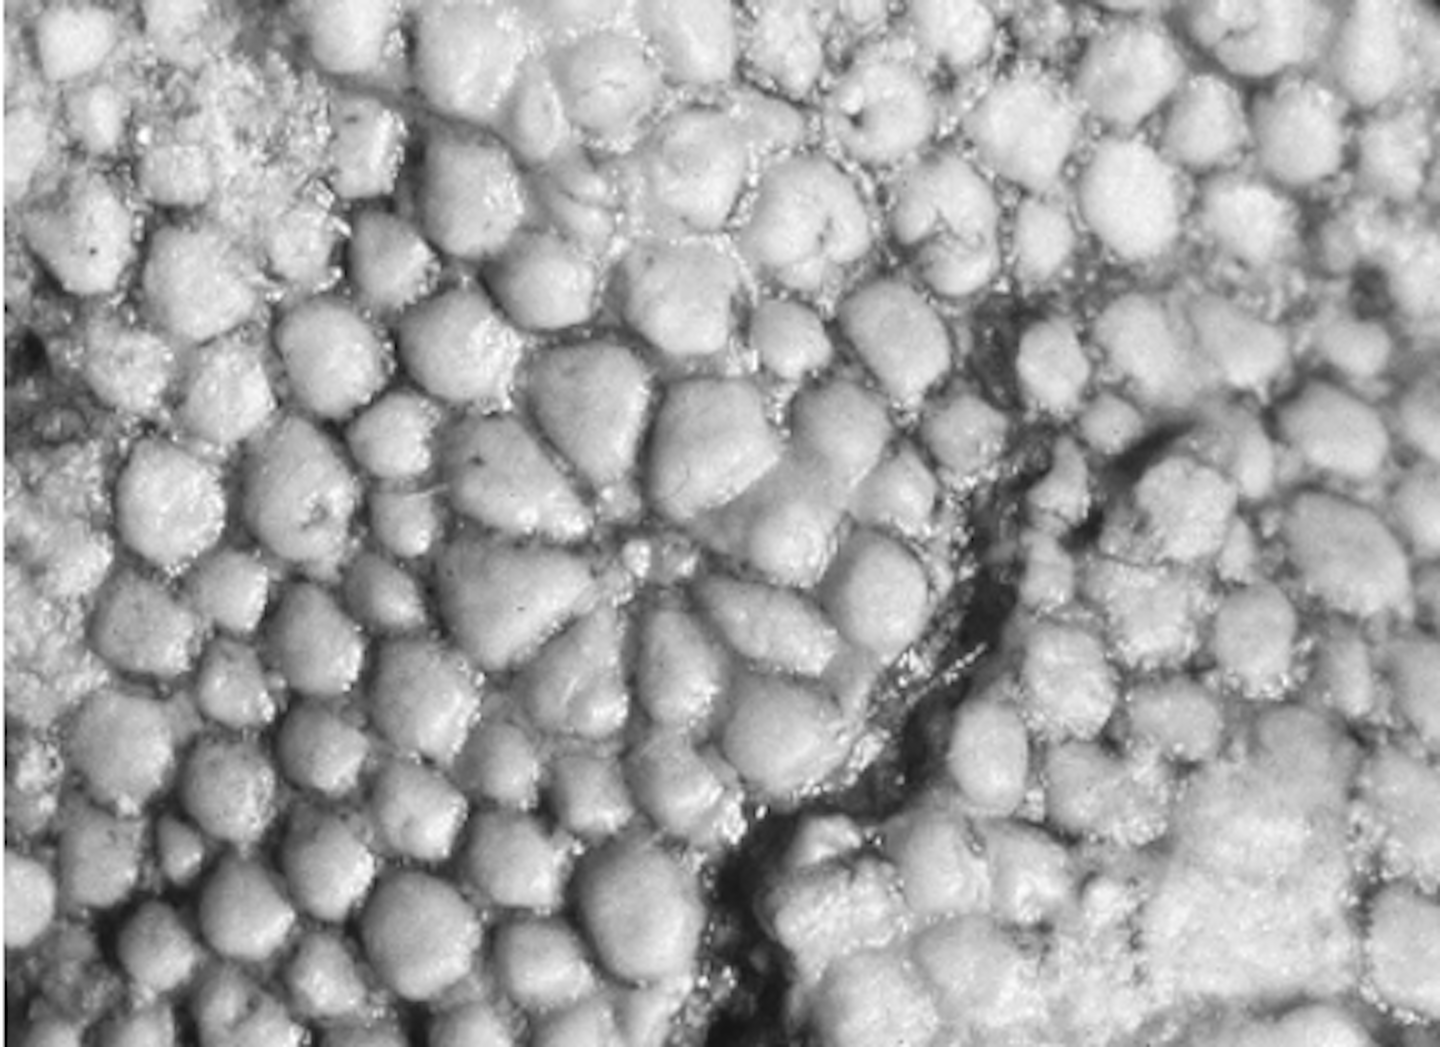 Black and white microscopic image showing a bumpy pattern.